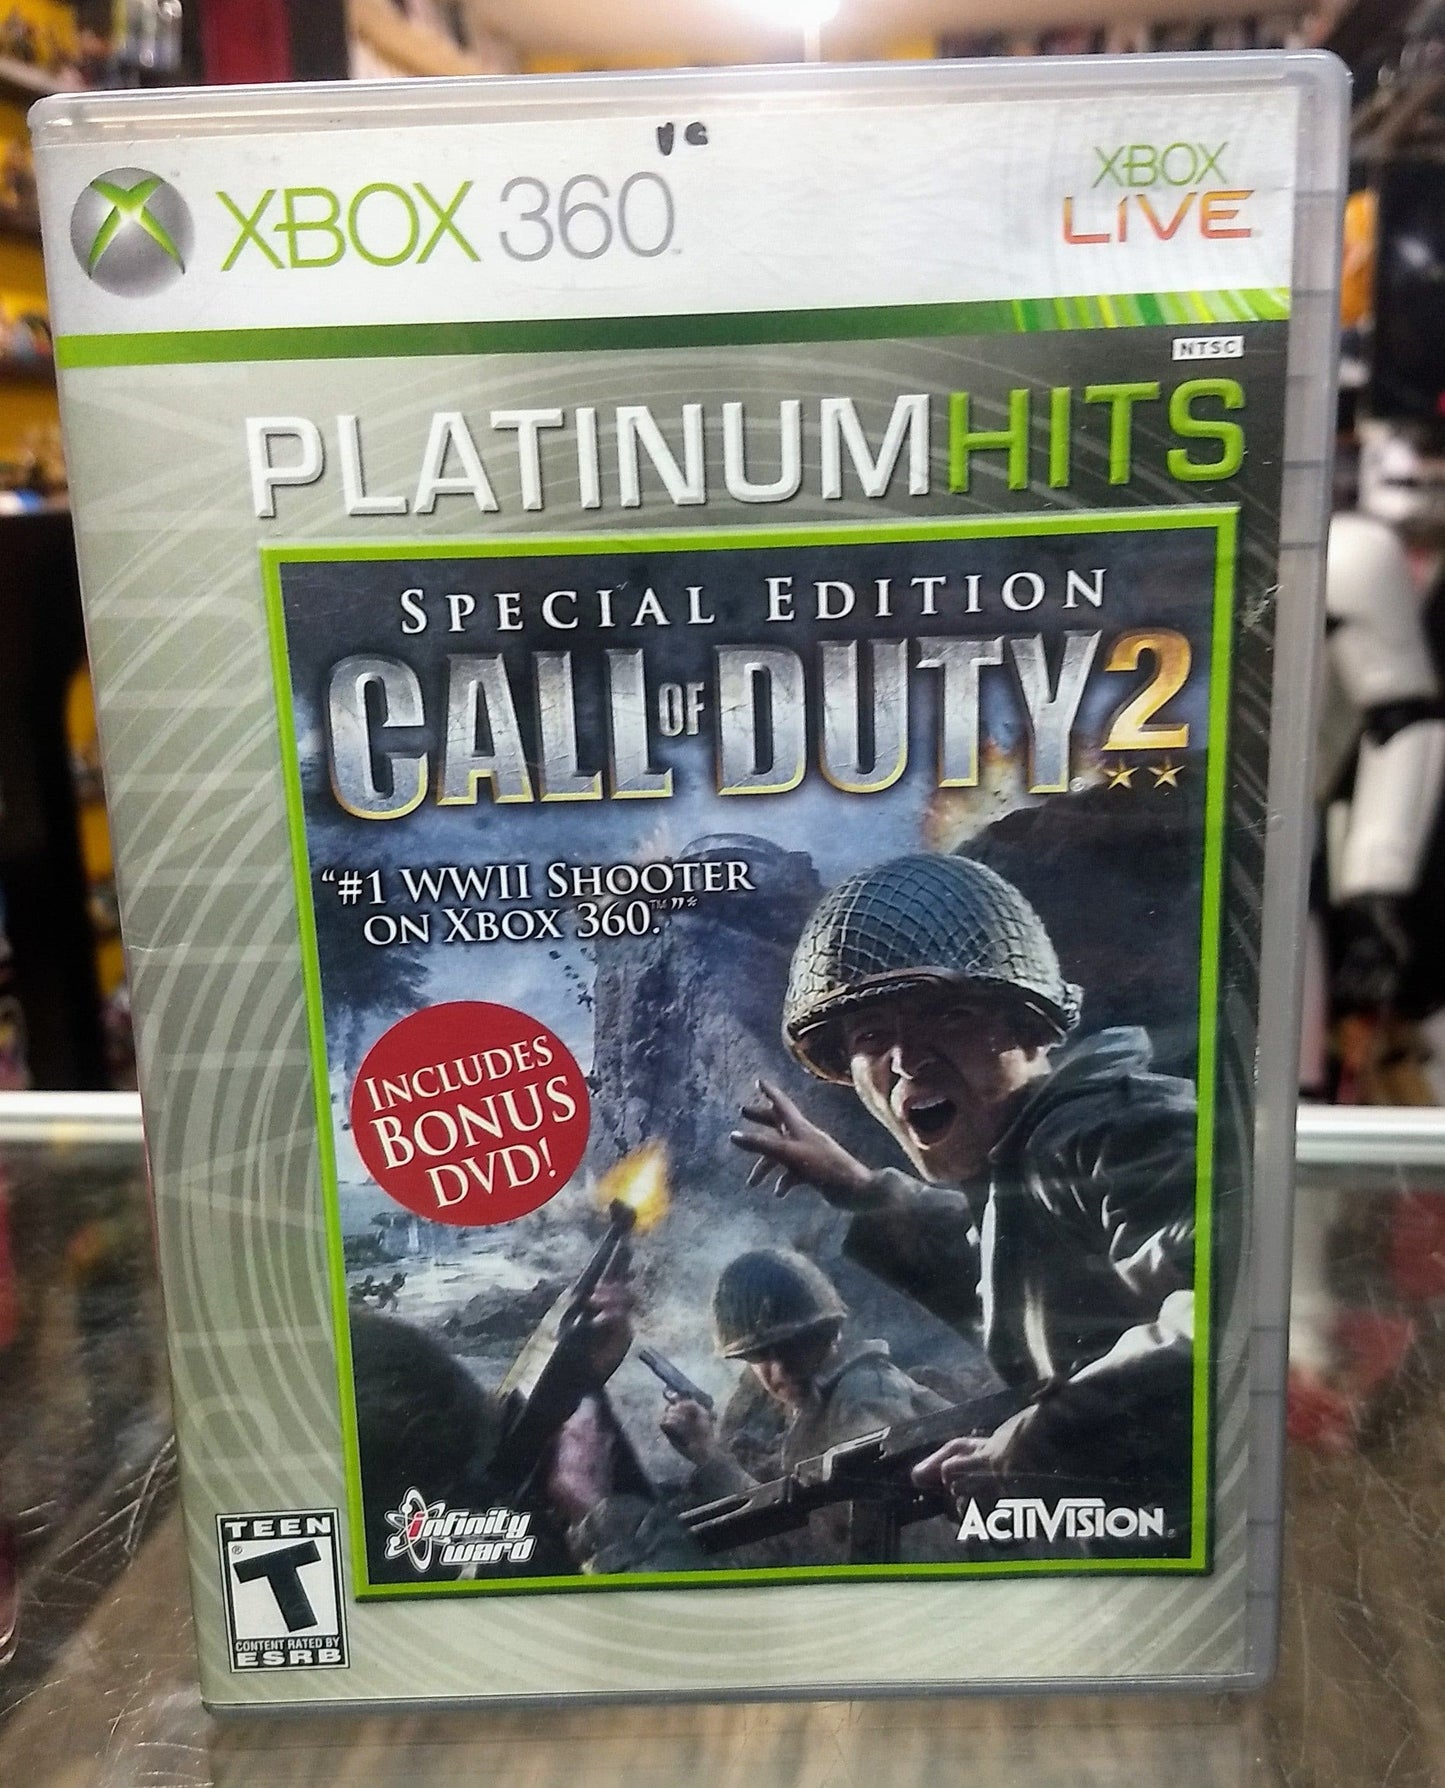 CALL OF DUTY 2 PLATINUM HITS SPECIAL EDITION (XBOX 360 X360) - jeux video game-x